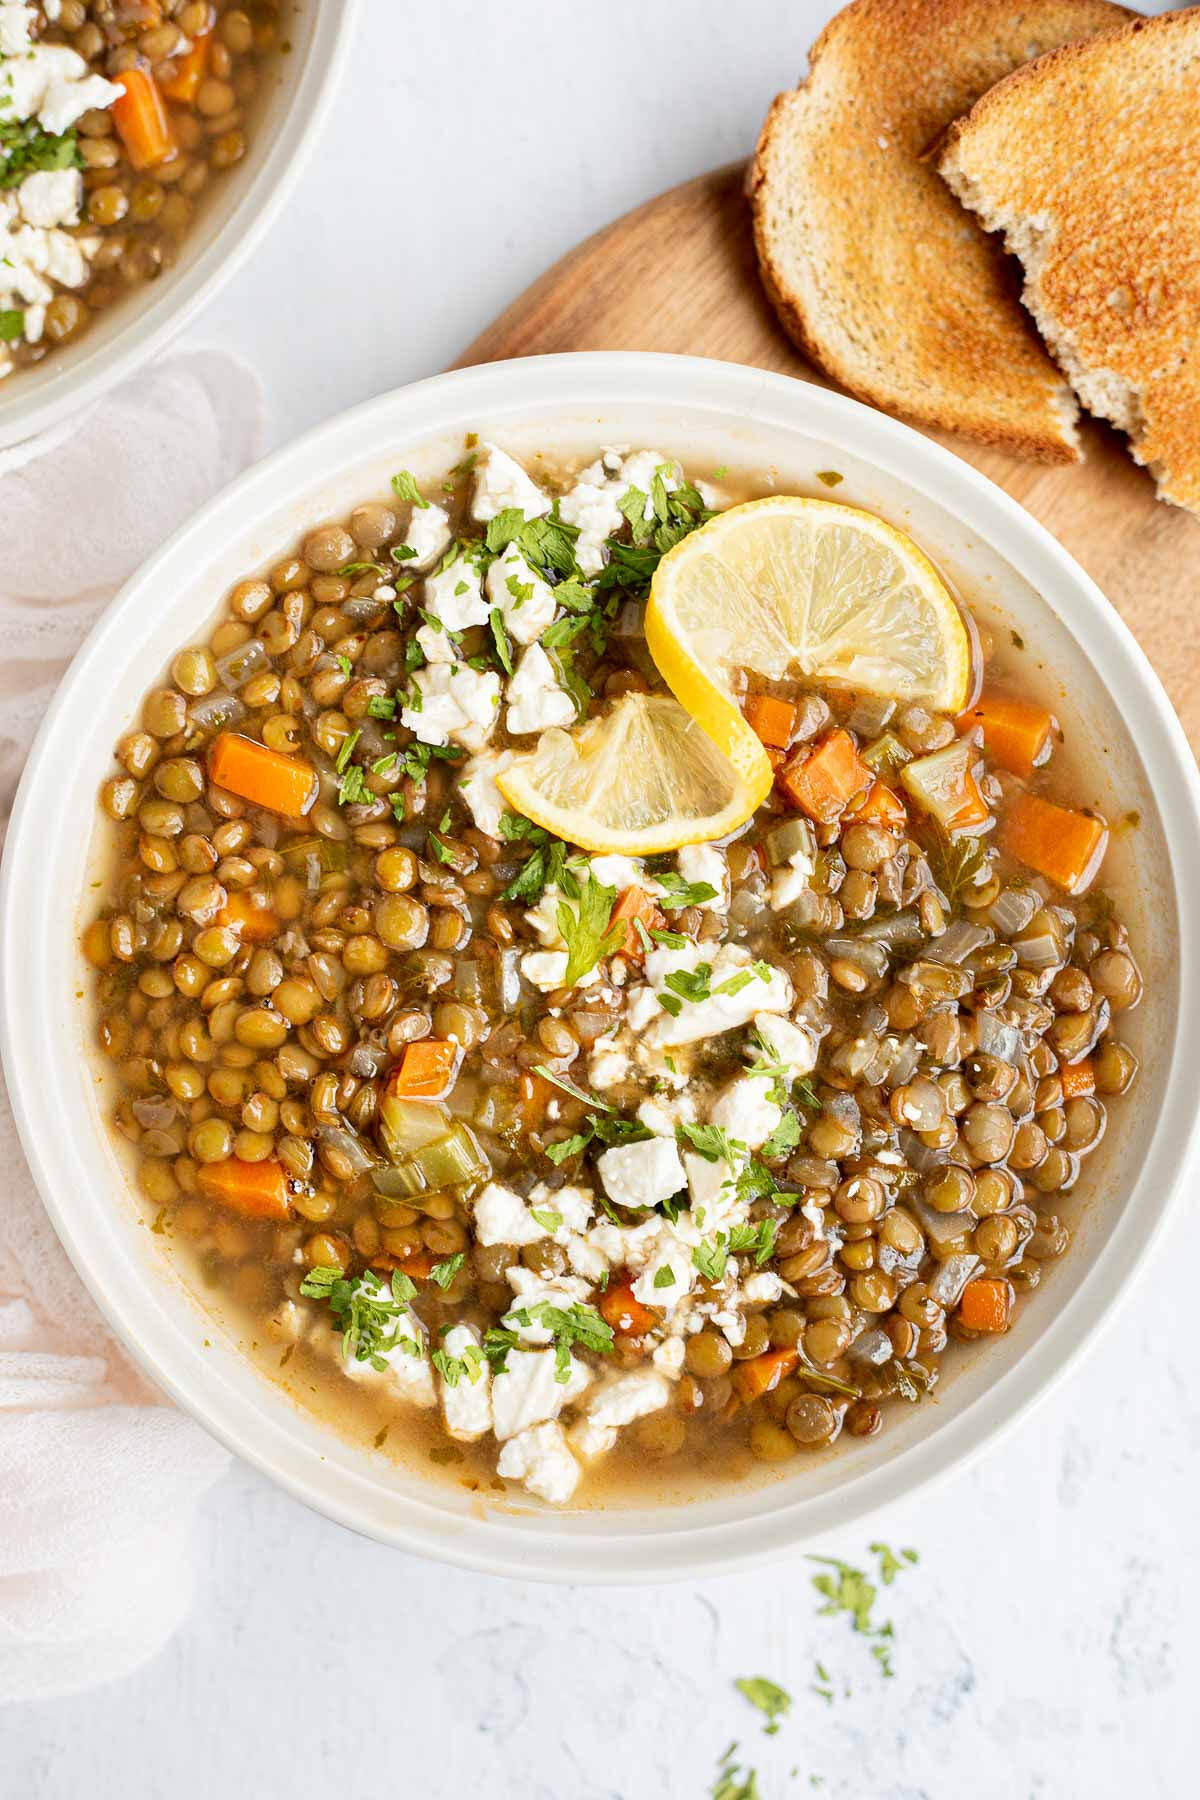 Vertical image of greek lentil soup with lemon and feta, with toast in the background.